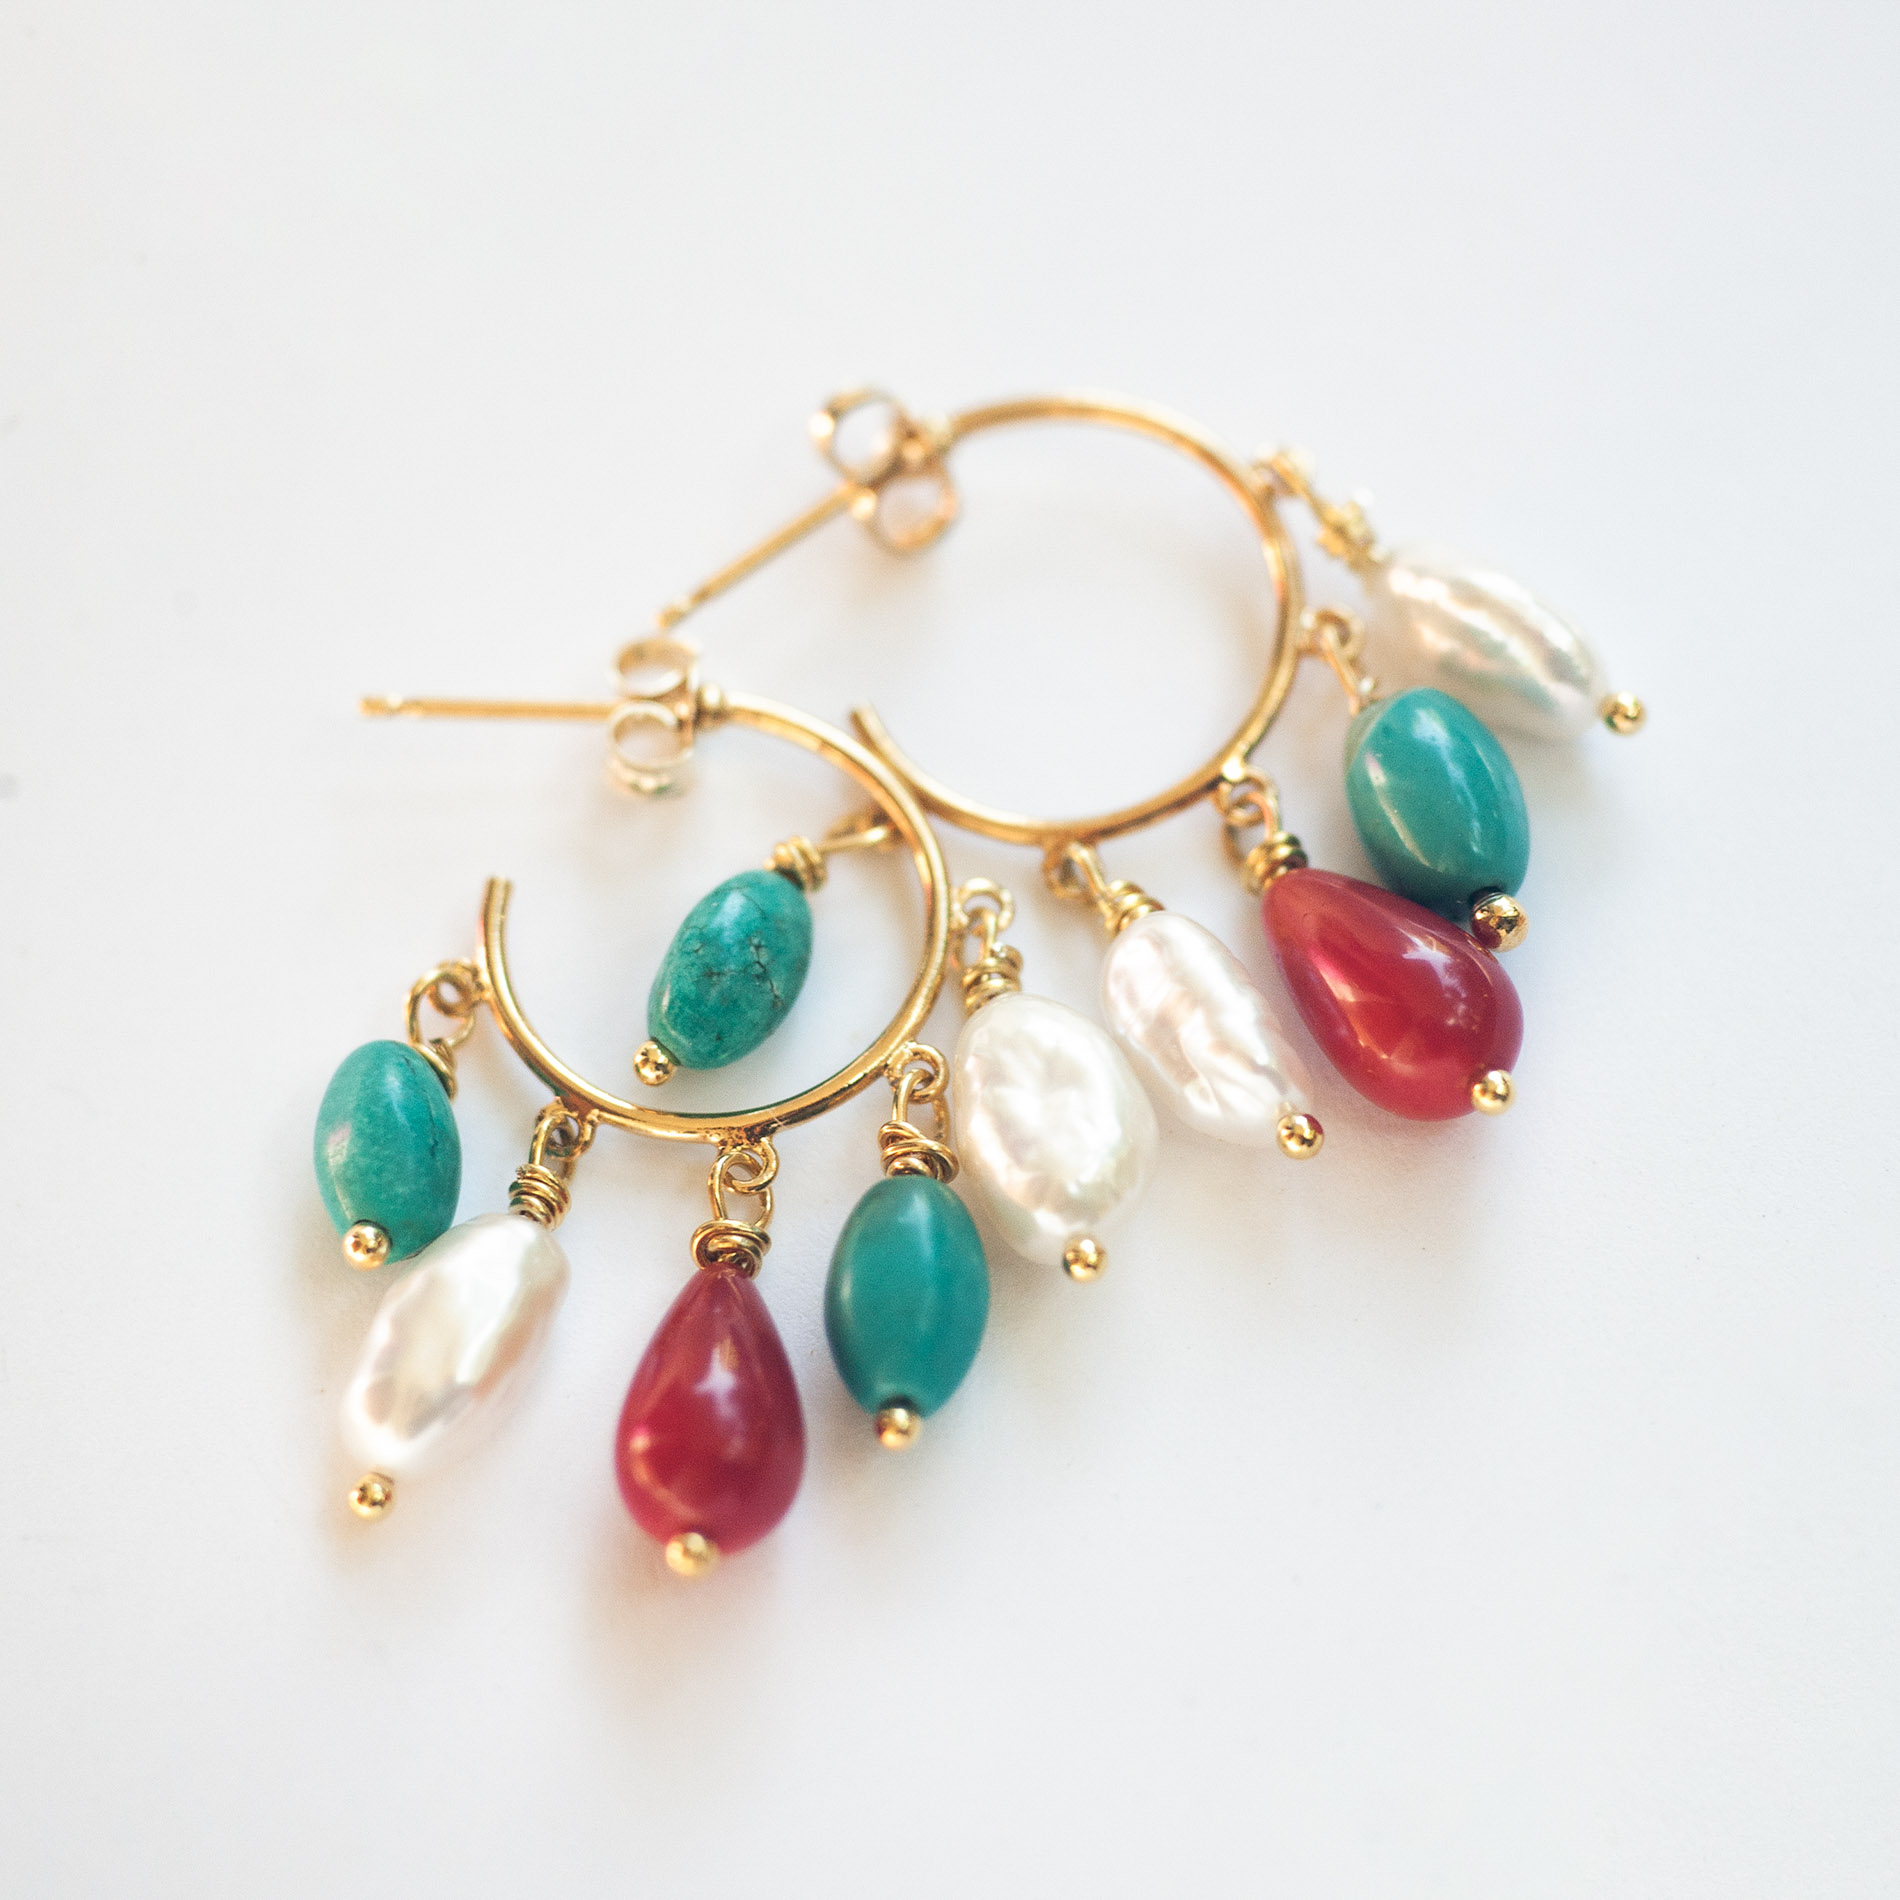 Gold plated hoop earrings with fresh water pearls, corals & , turquoise stones.